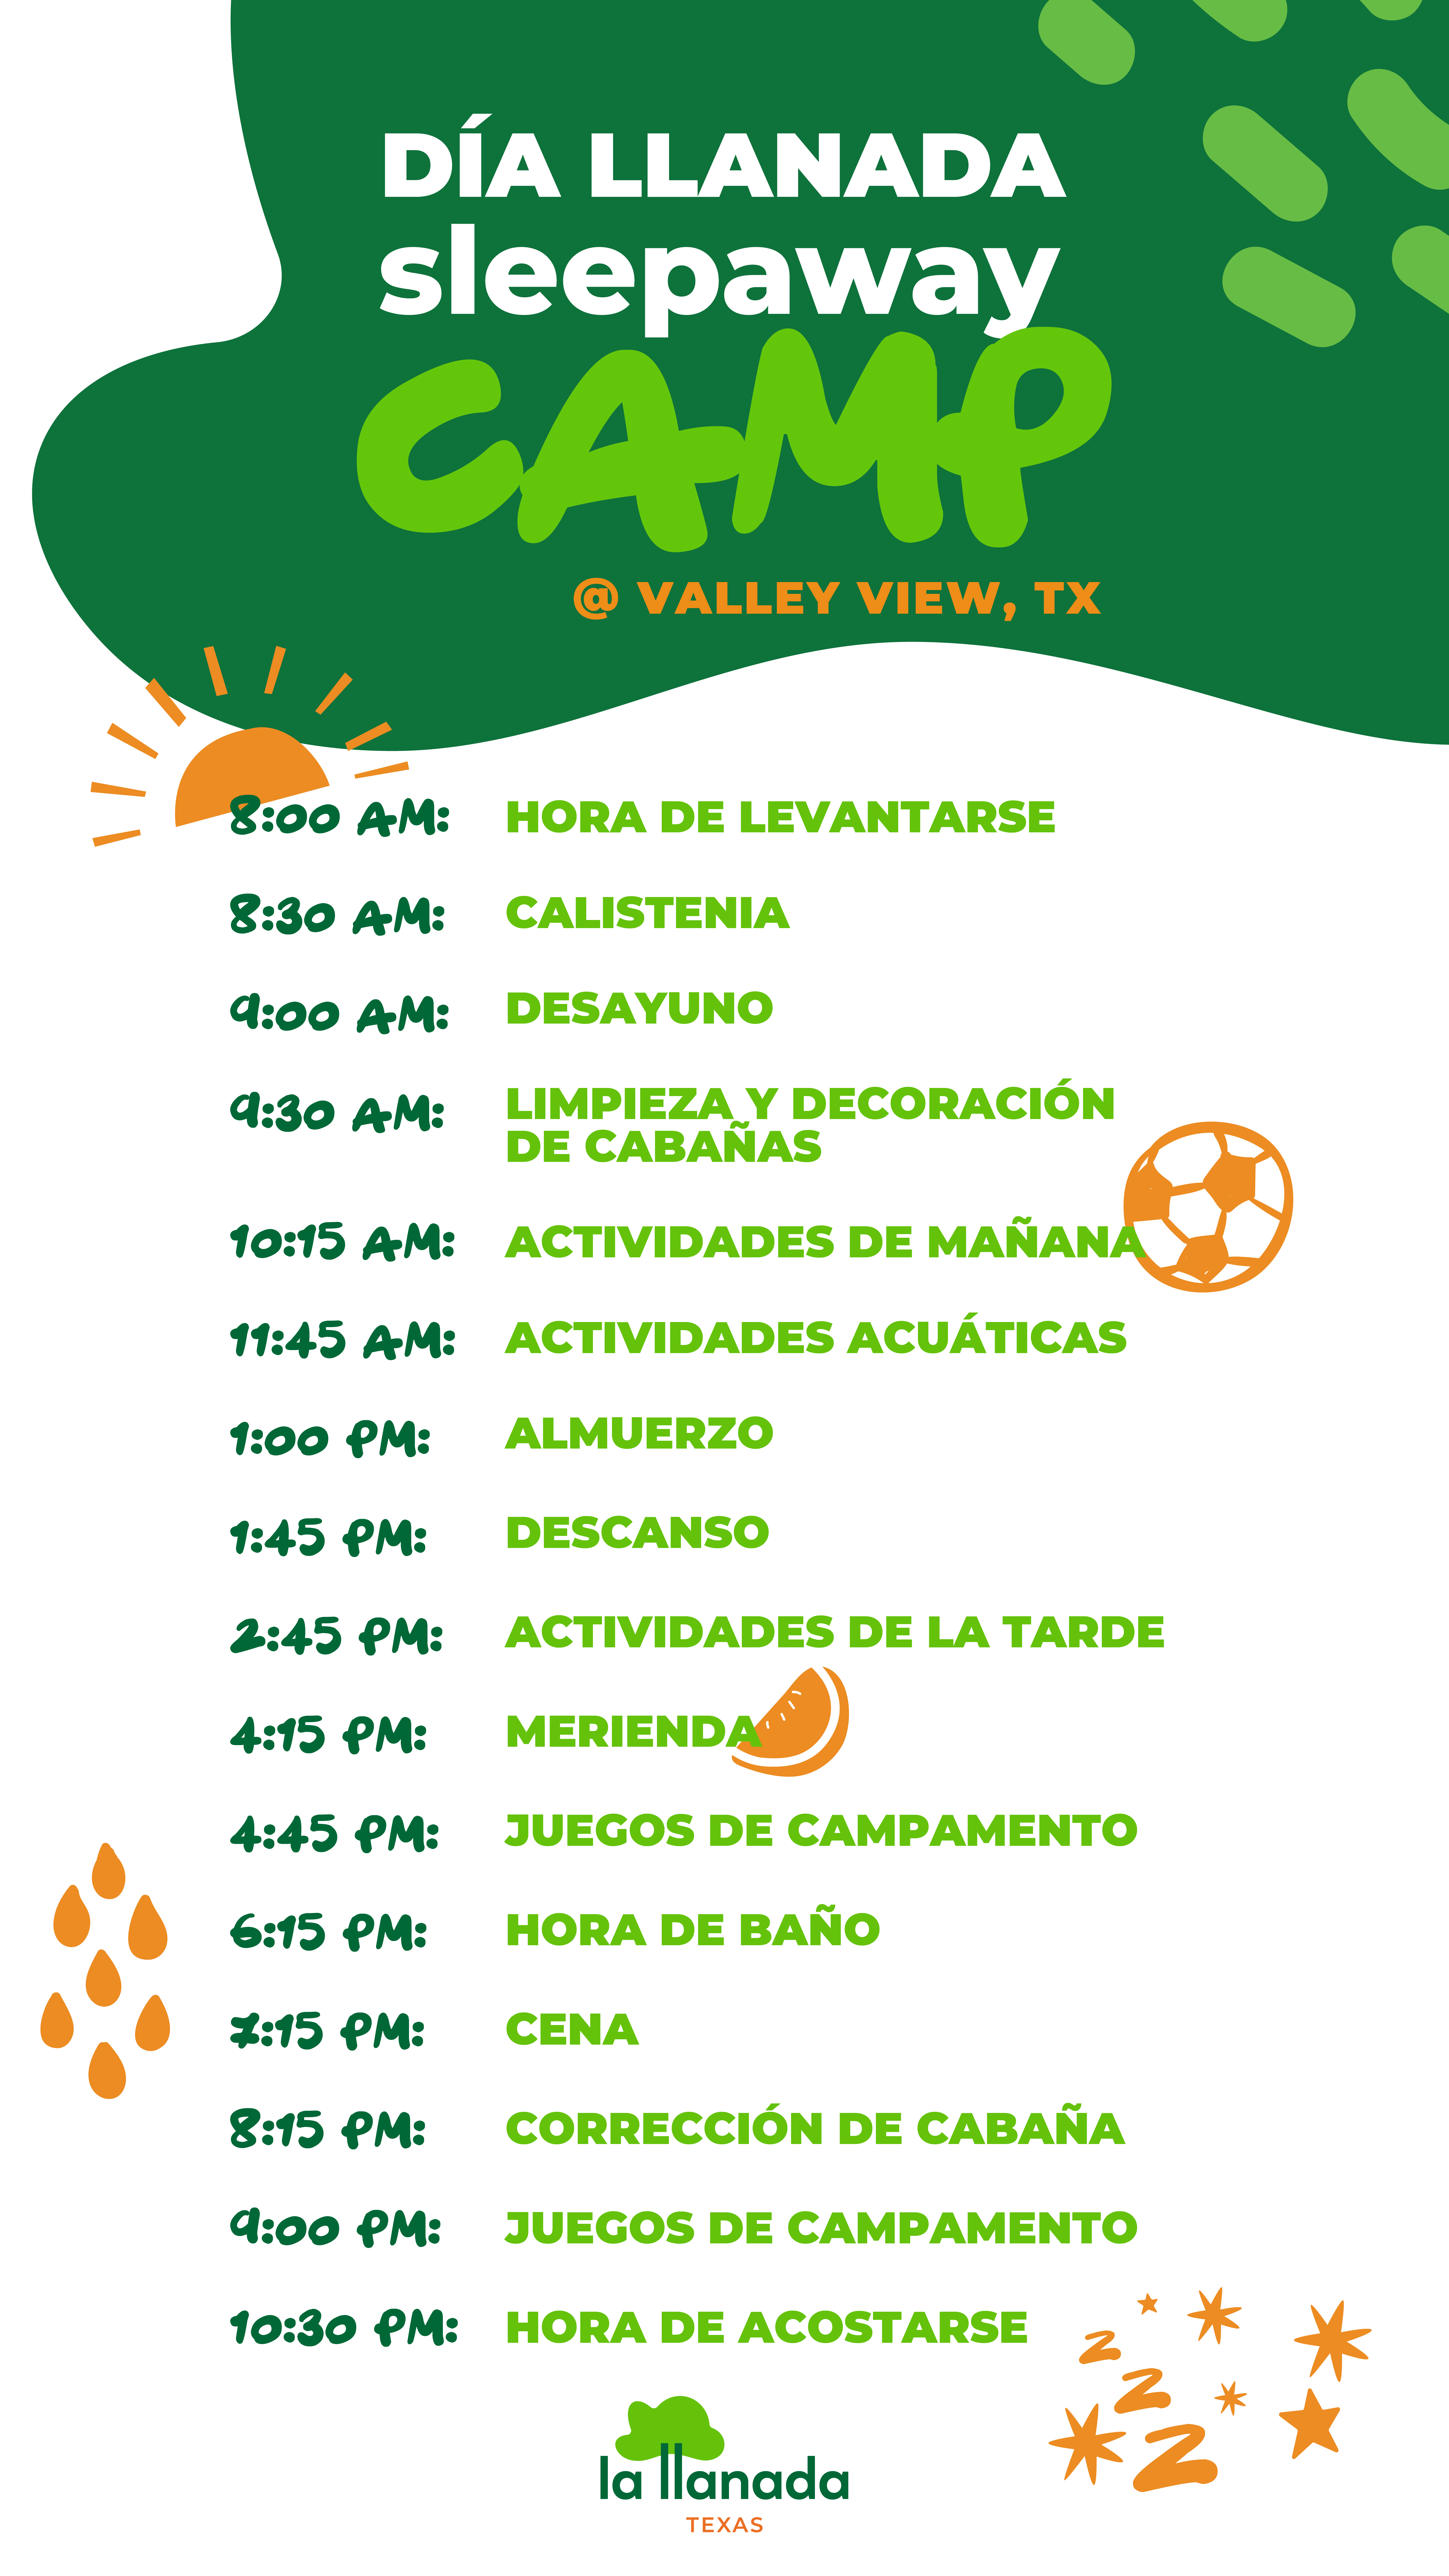 LLLTX_DiaLlanada_DayCamp_ValleView_Mobile_Ingles